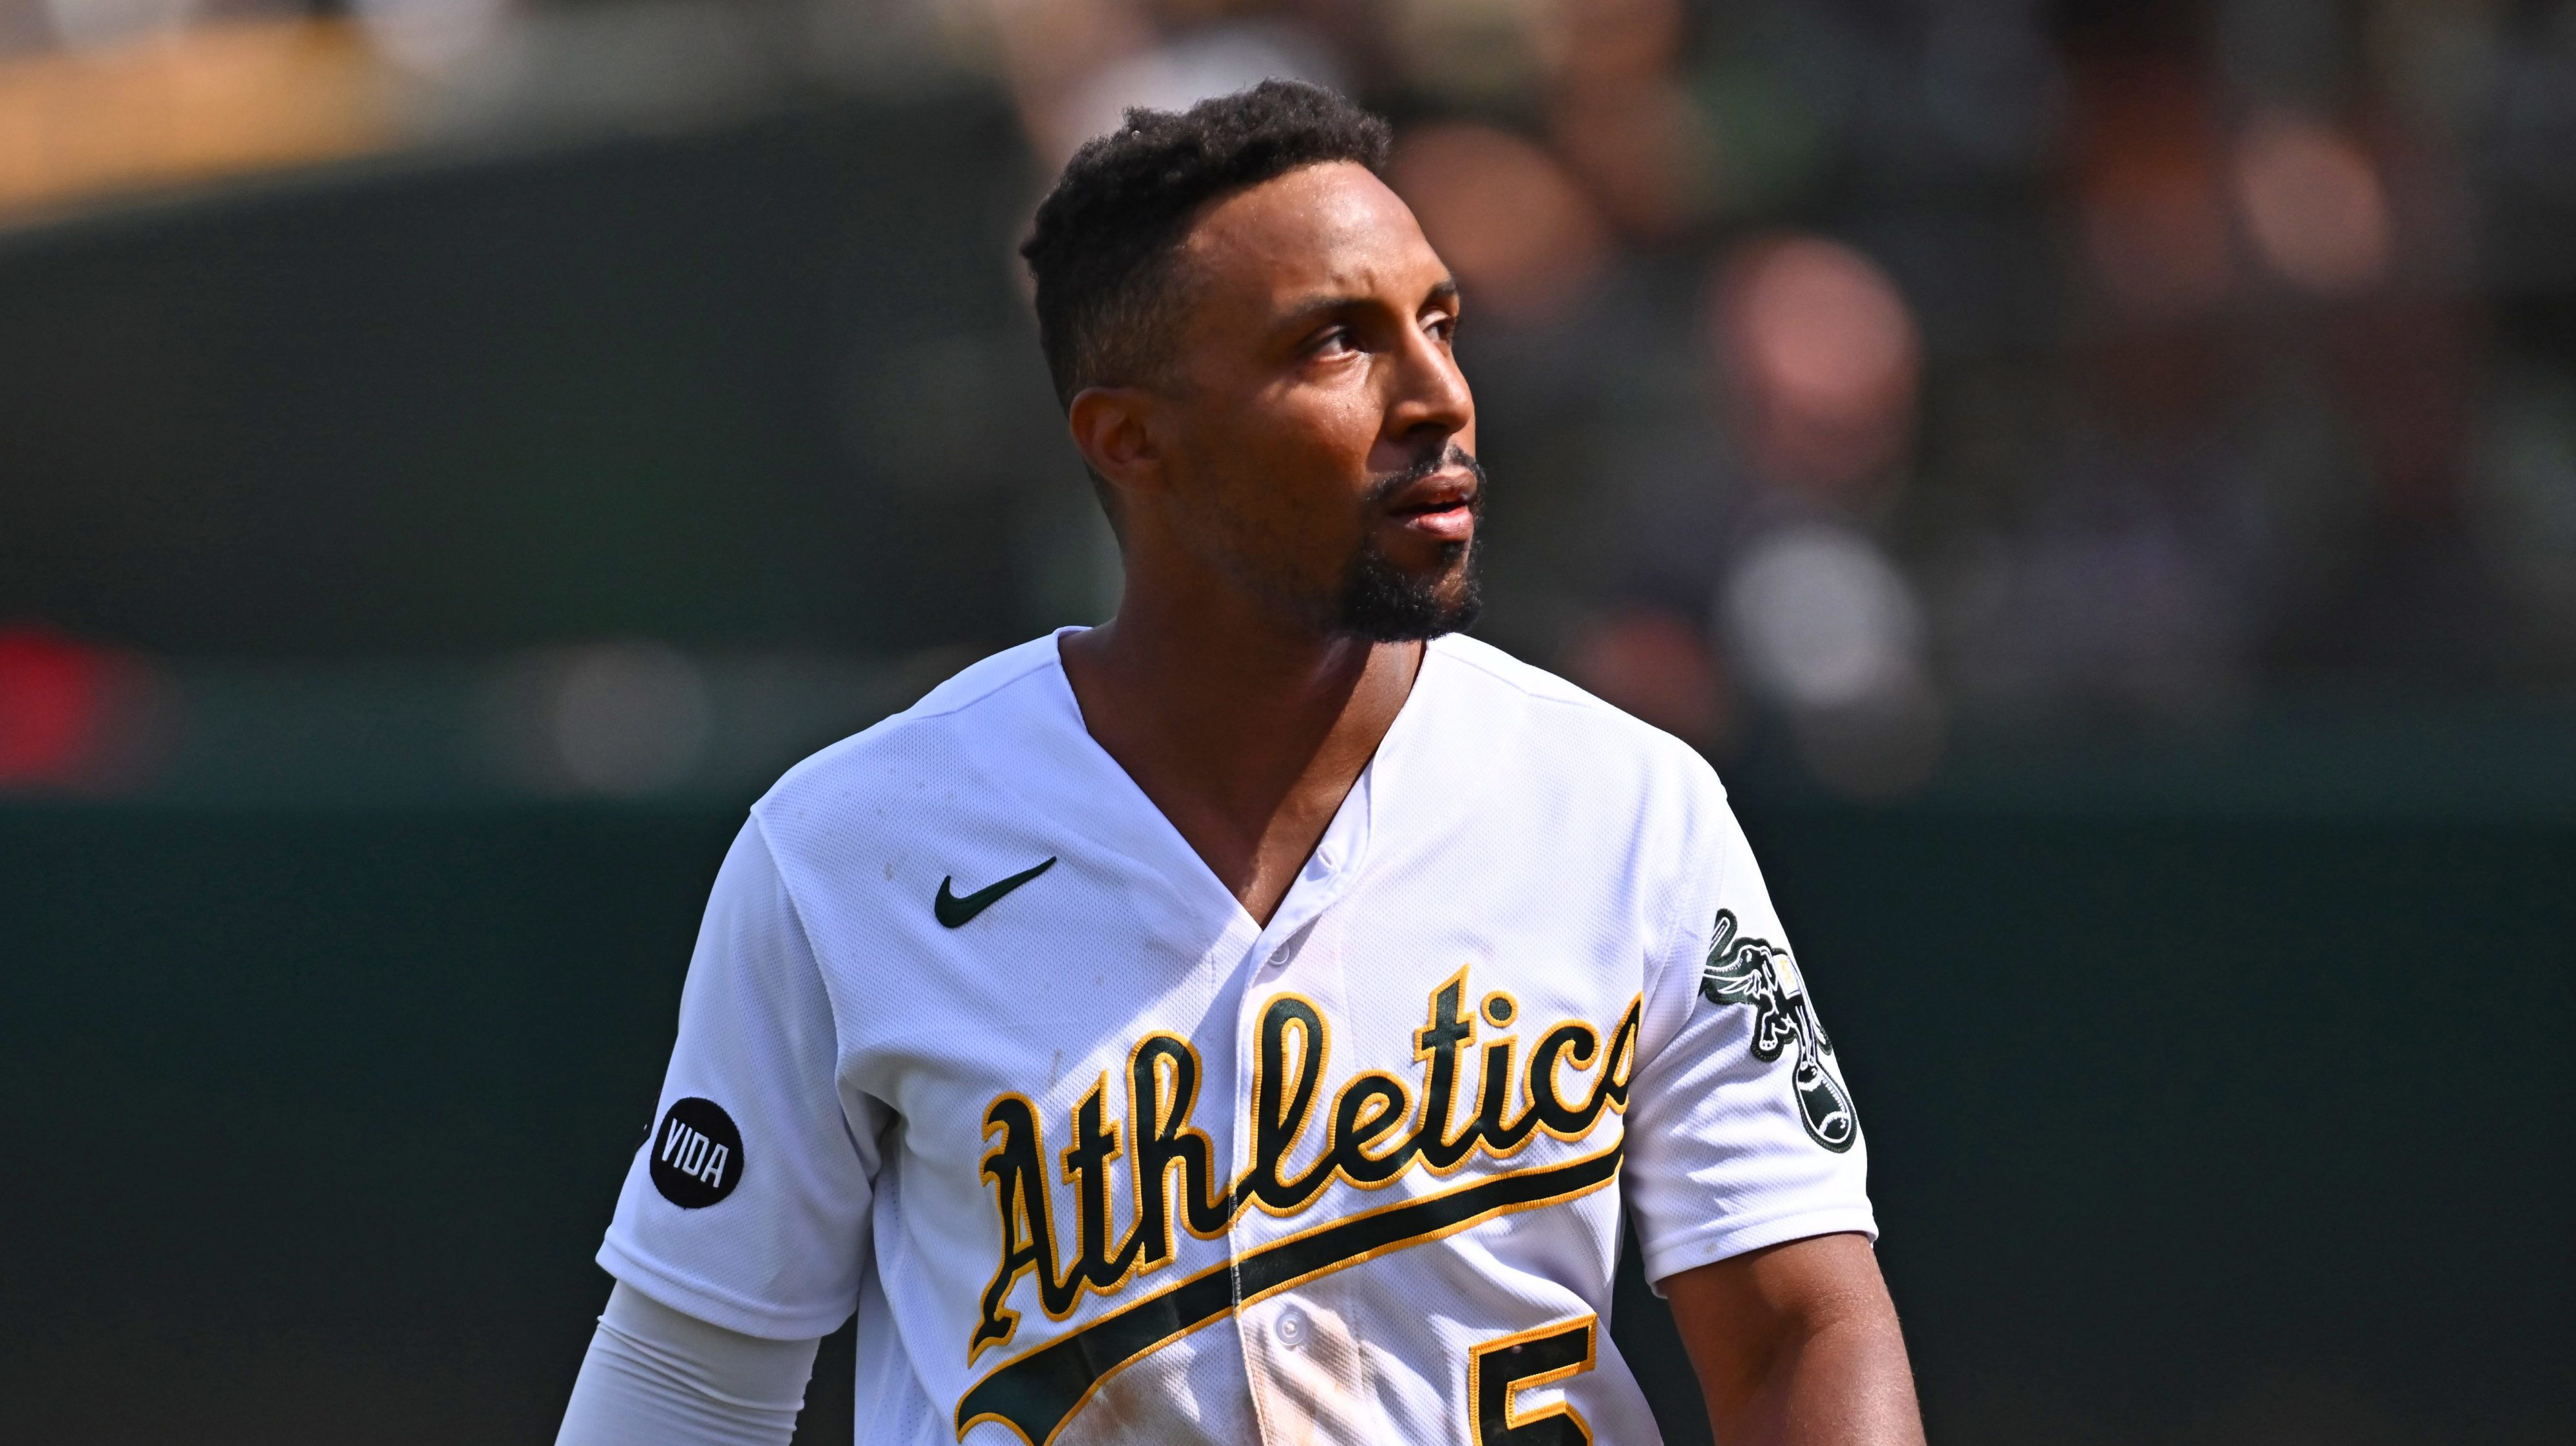 Orioles sign 2B/OF Tony Kemp to major league deal as opening day roster